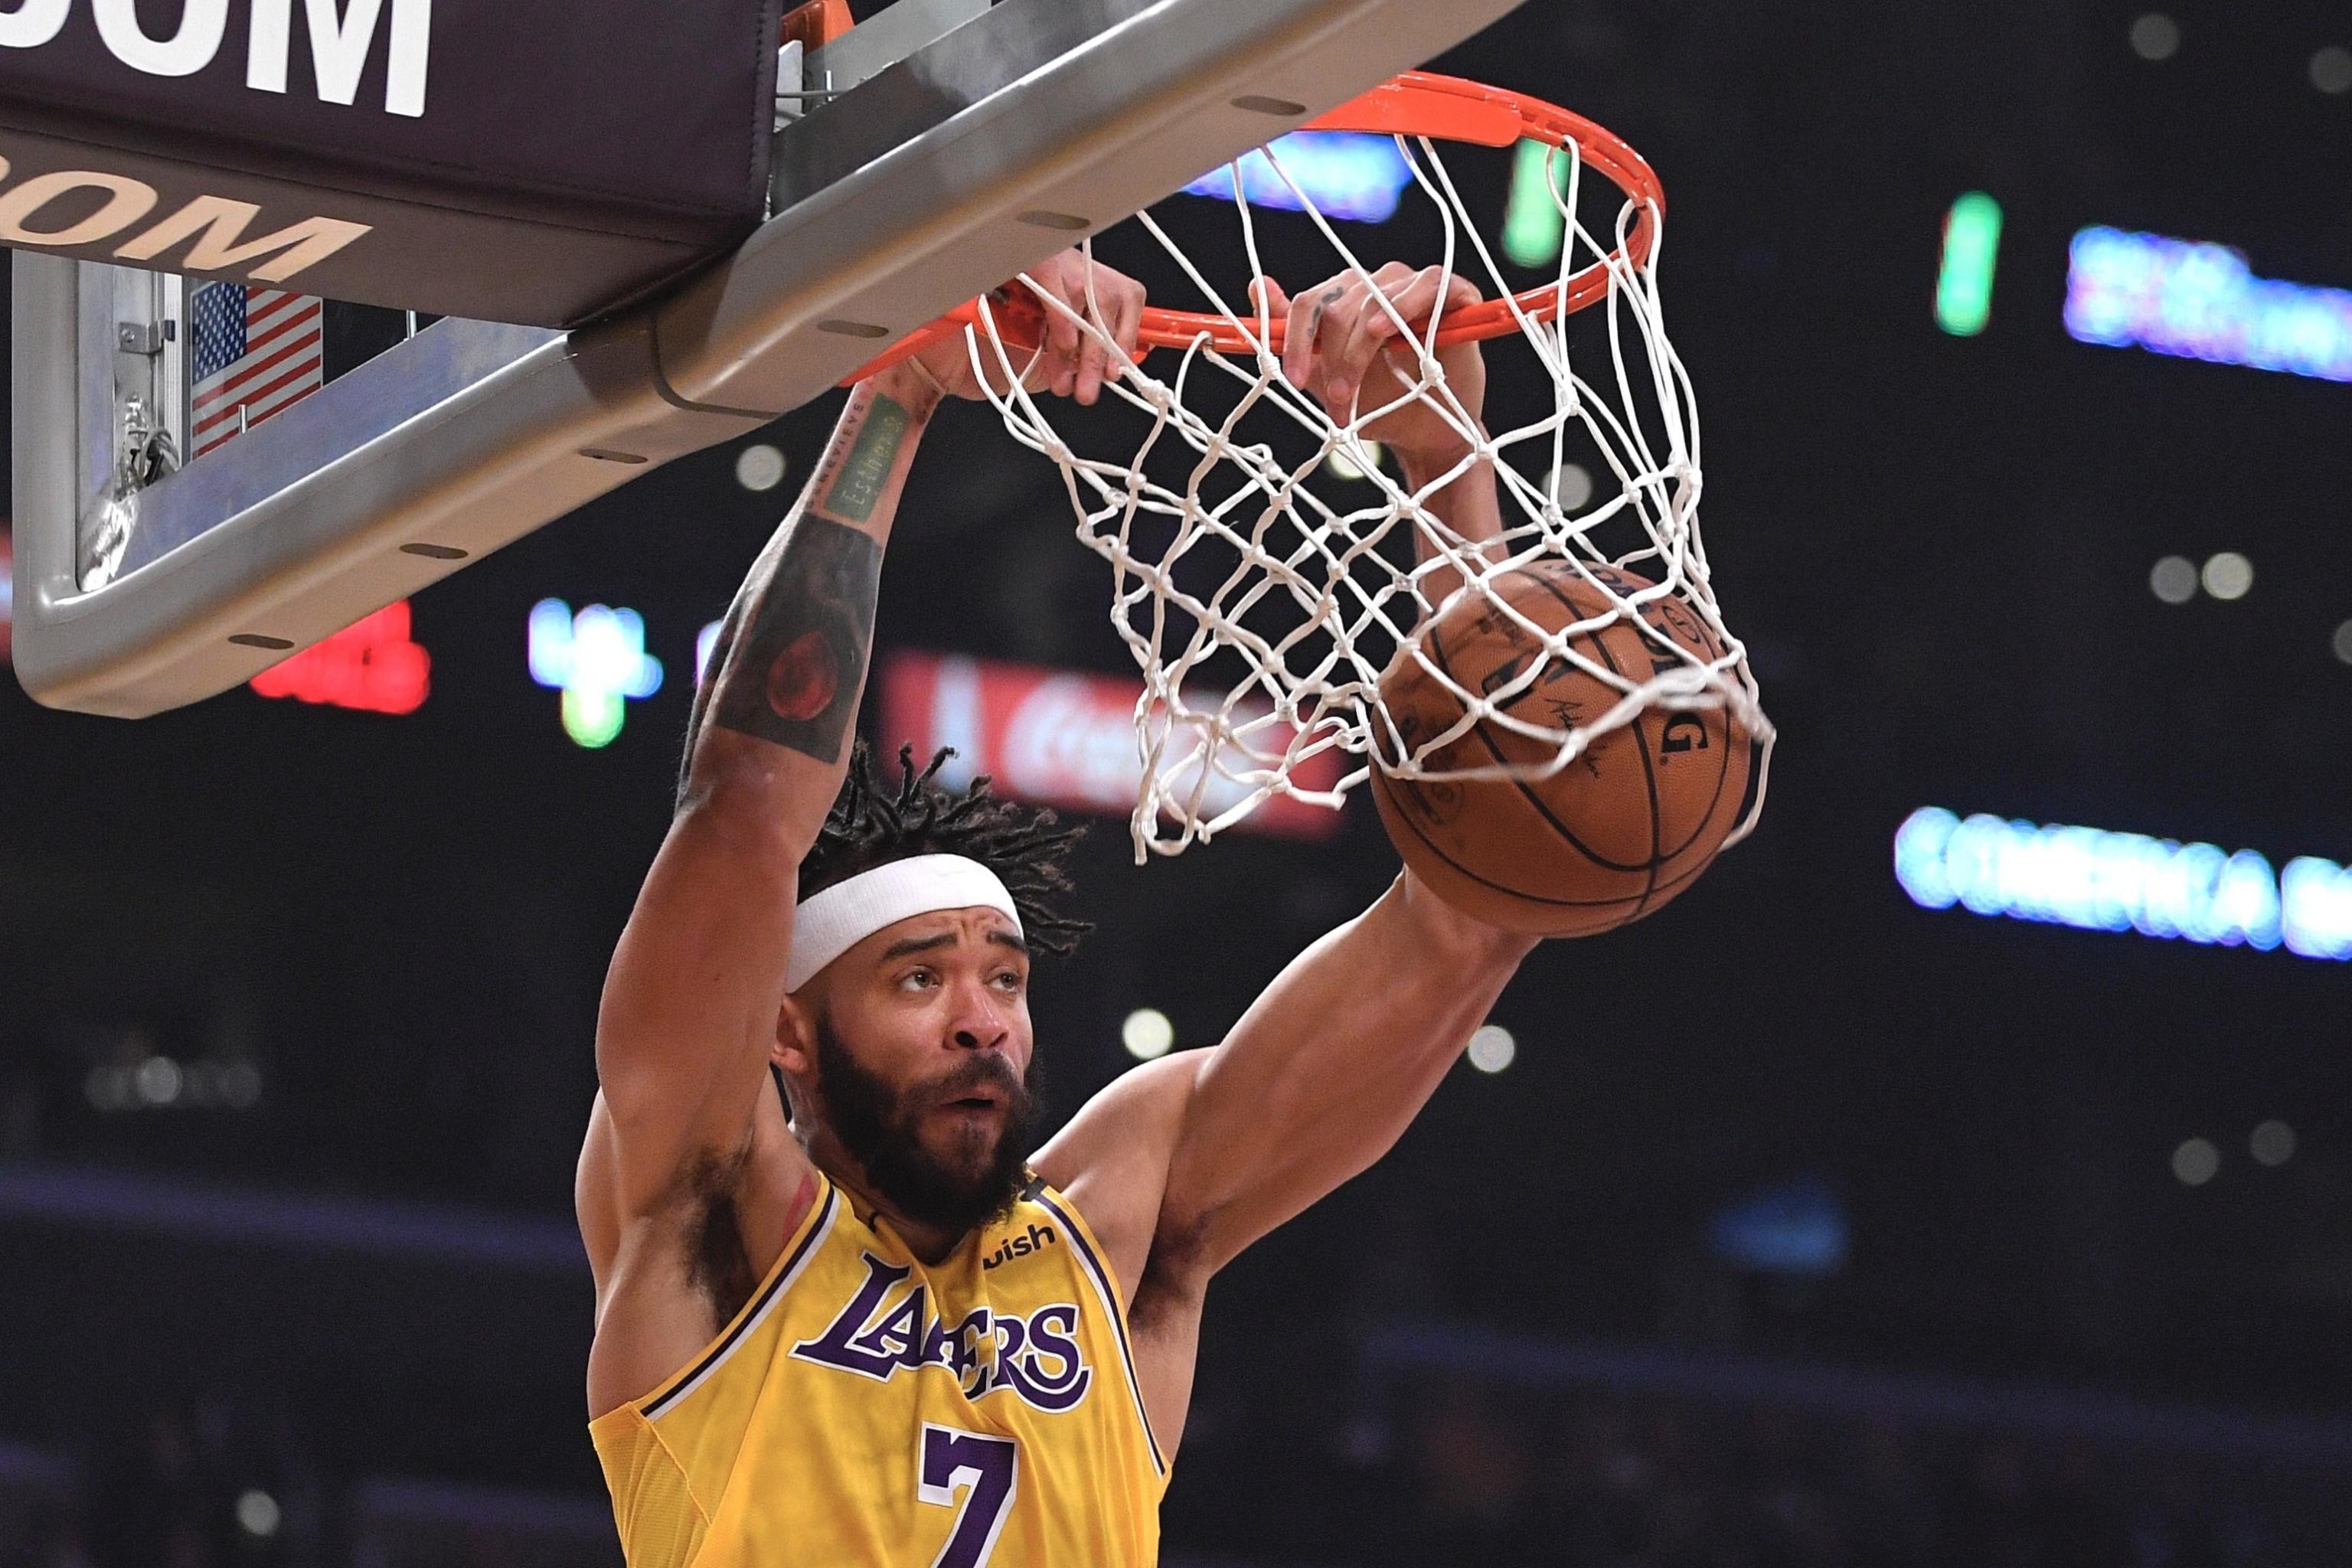 Go inside the NBA bubble with Los Angeles Lakers' Javale McGee's